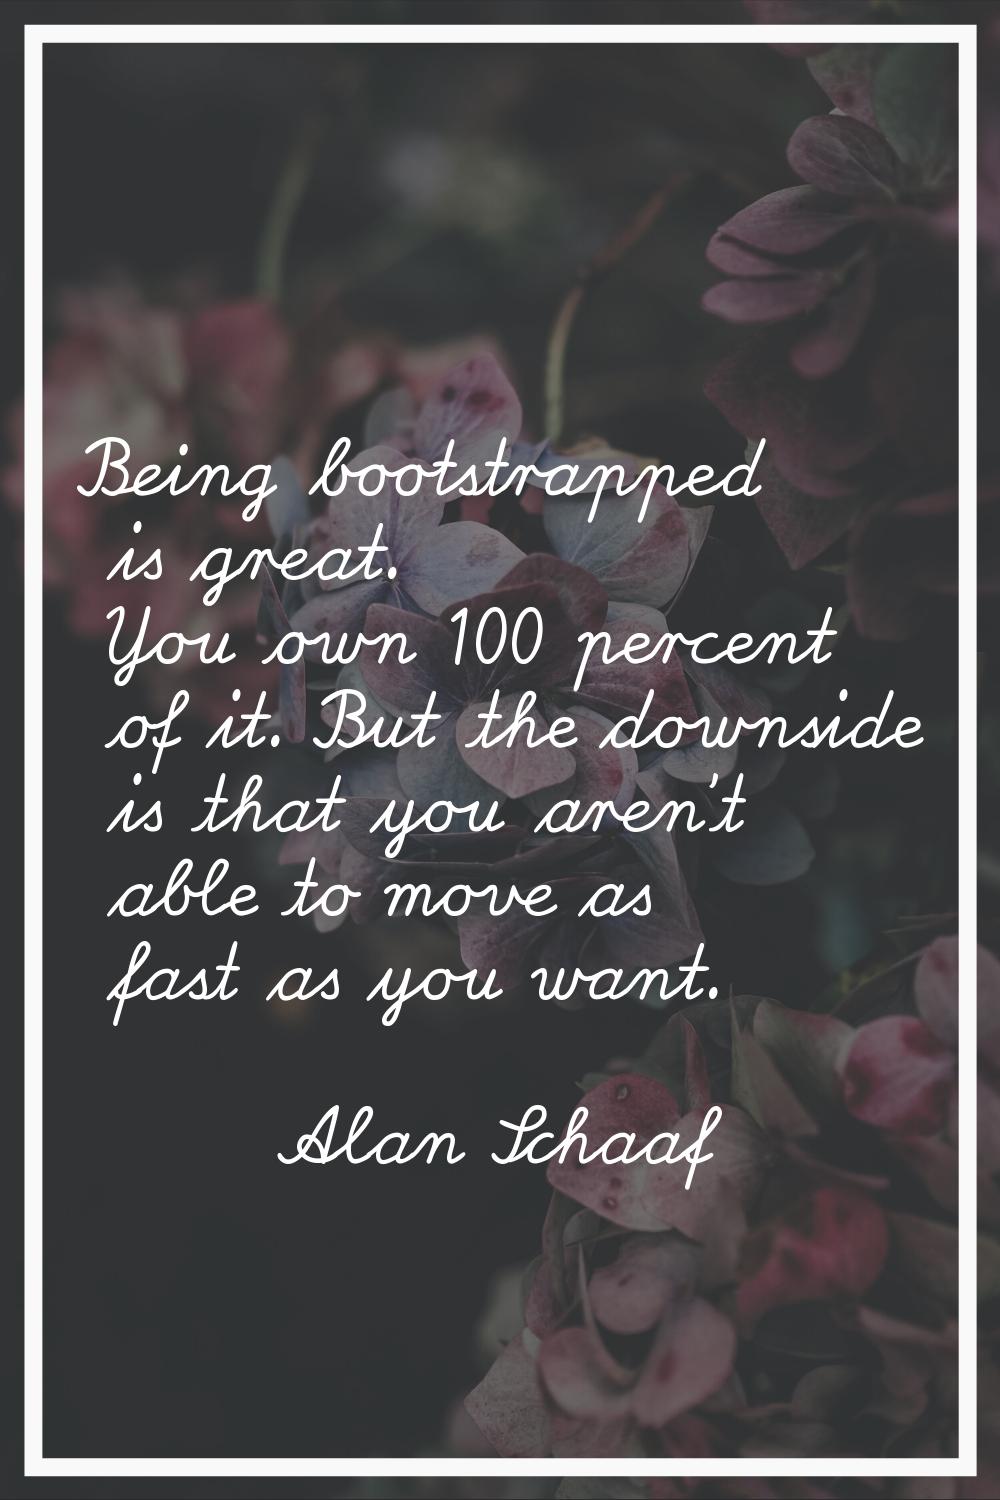 Being bootstrapped is great. You own 100 percent of it. But the downside is that you aren't able to